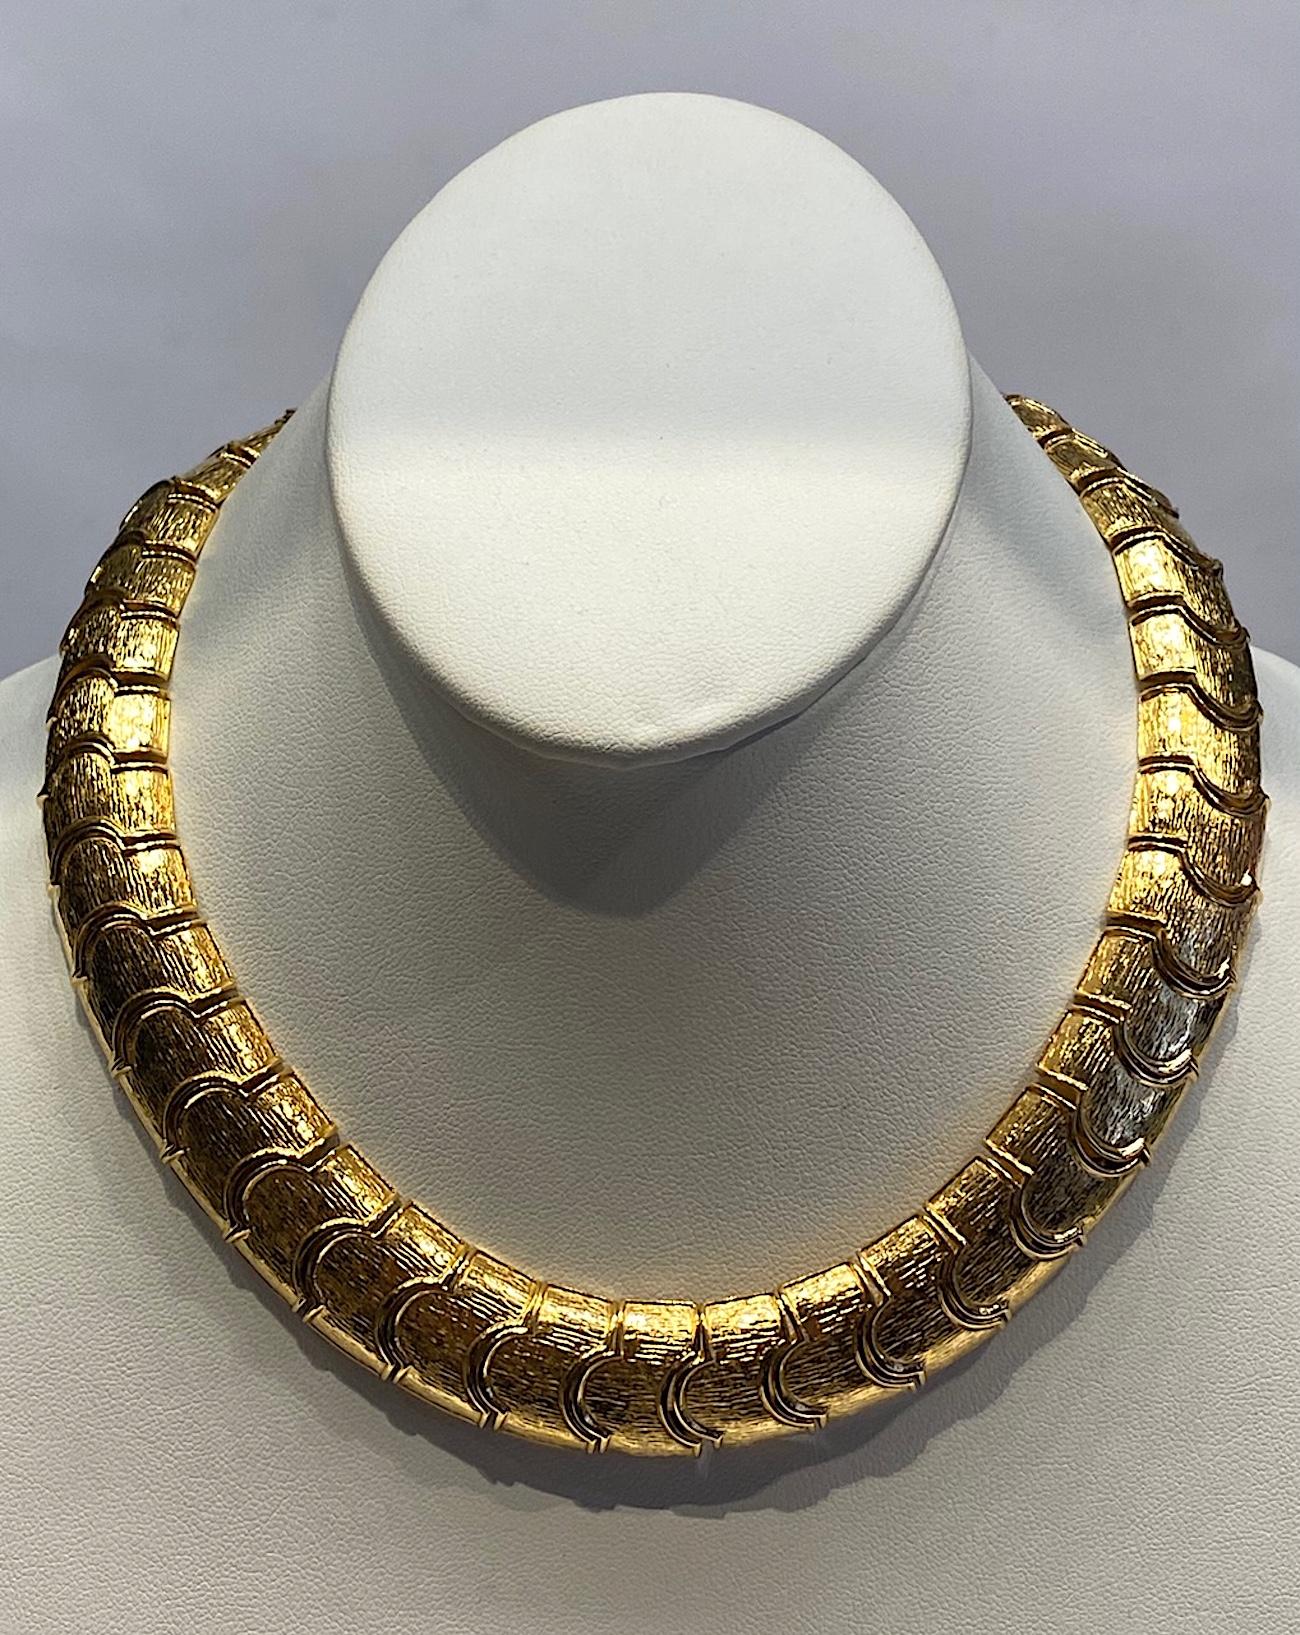 A lovely tailored style 1980s necklace by American fashion jewelry company Ciner of New York. There are 41 lightly textured parenthesis shape links that make up the necklace. It is .75 of an inch wide and 16.5 inches long. The push pin clasp is